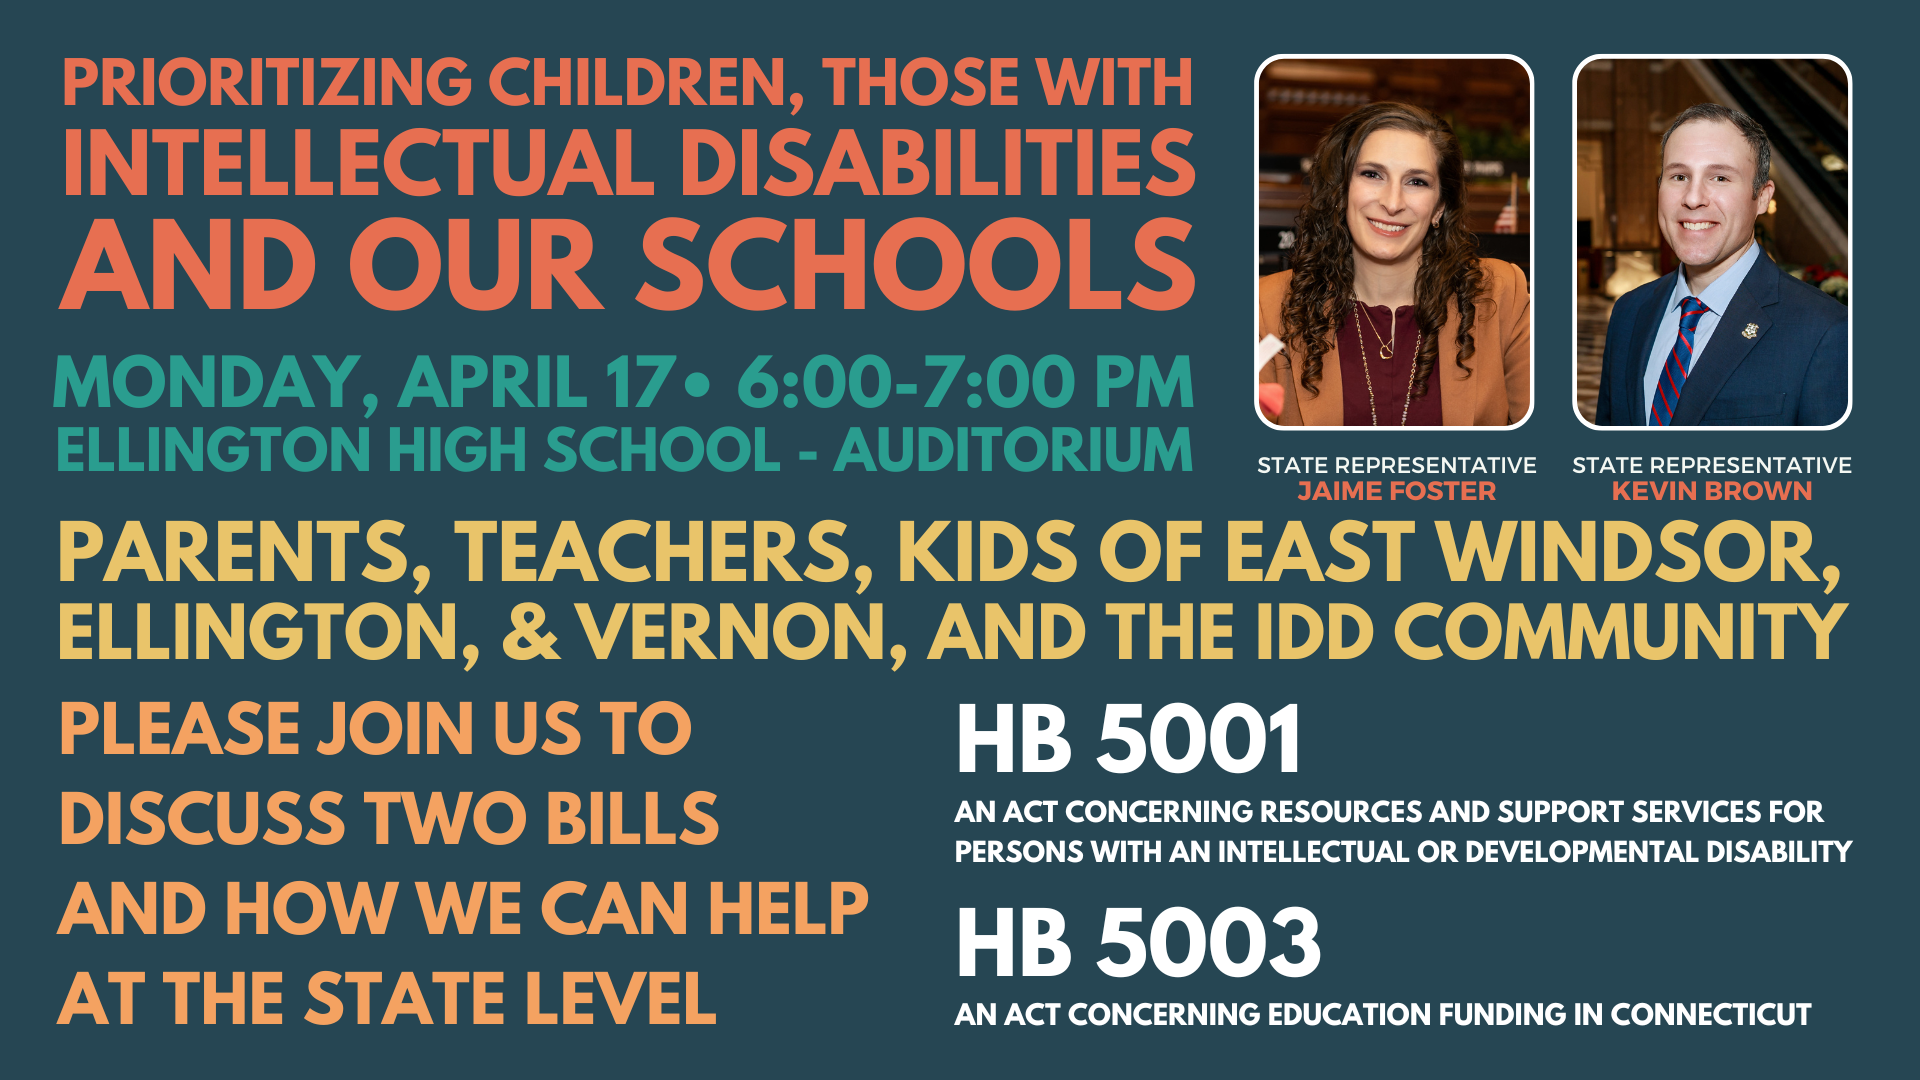 Please join me & Rep. Kevin Brown for this important meeting at Ellington High School.